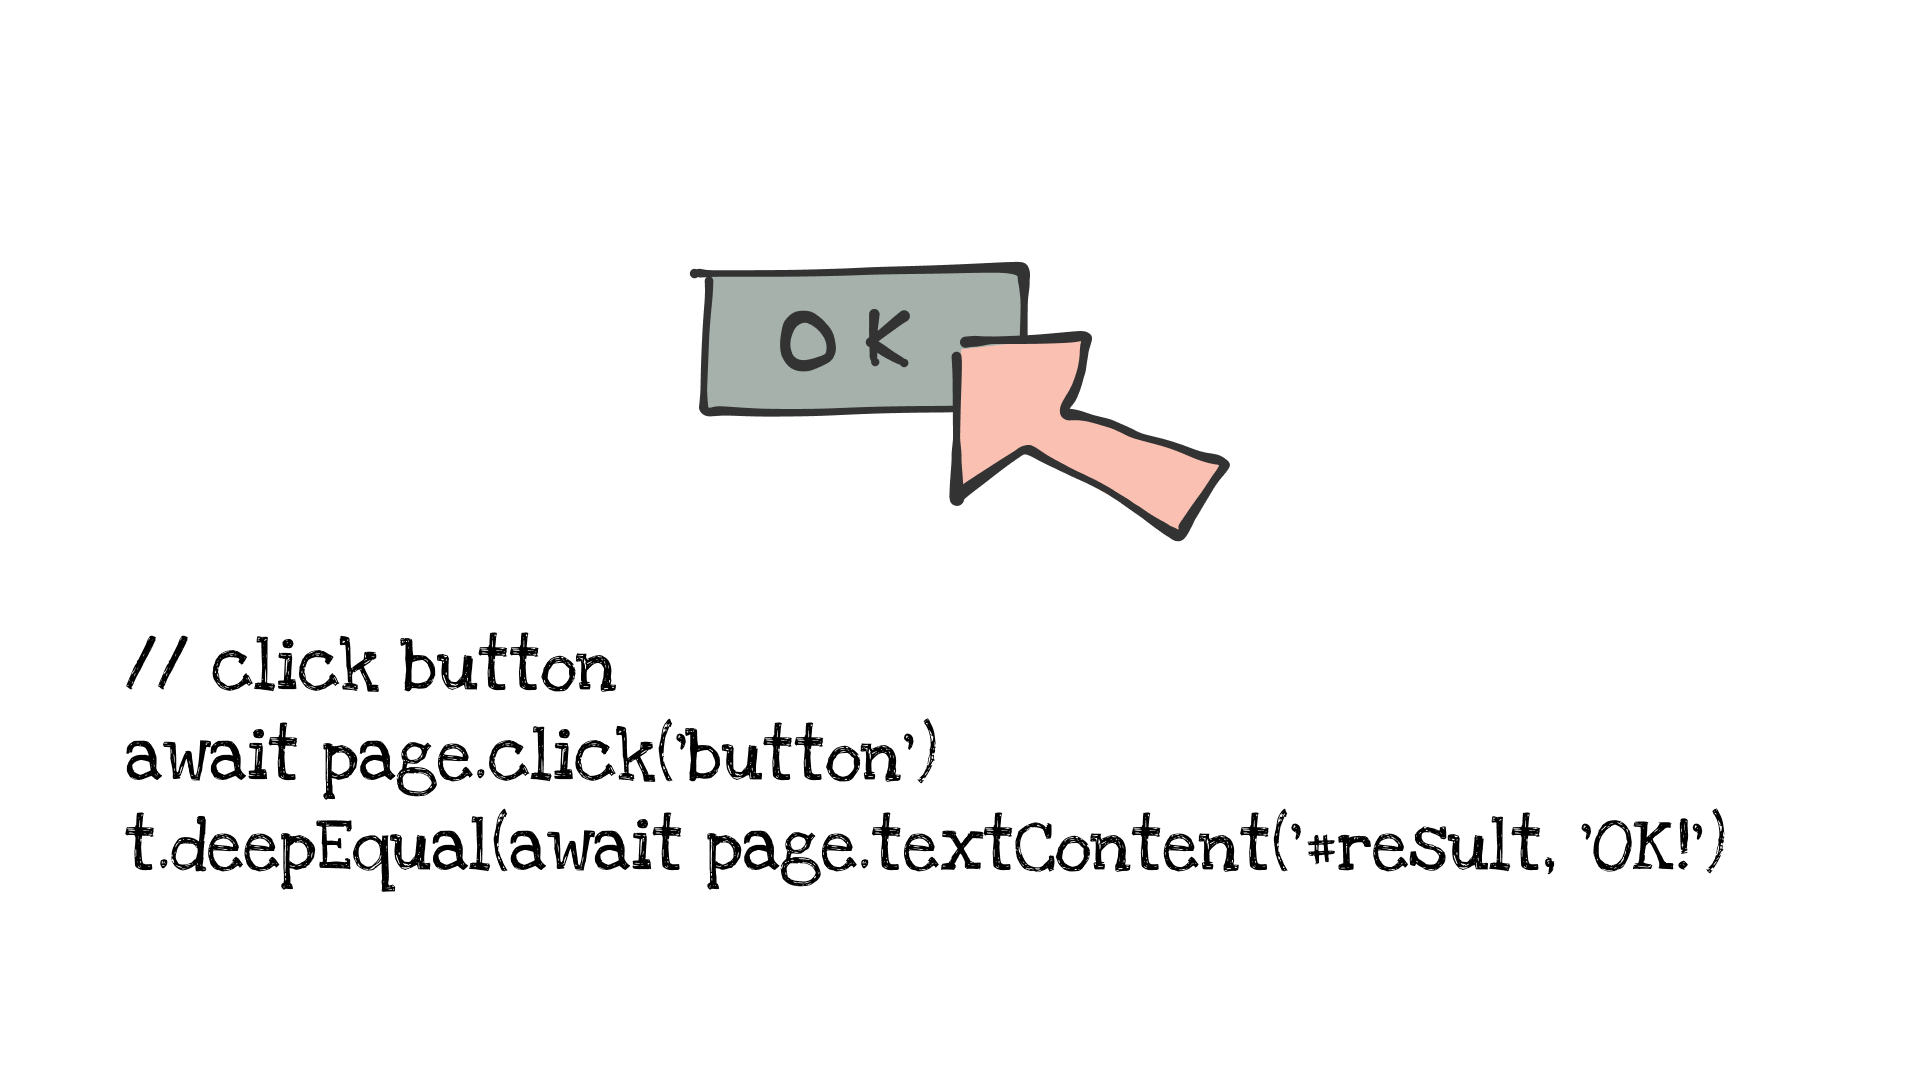 Showing an ok-button and a mouse pointer about to click it. Then some pseudo-code for testing the UI of the button.